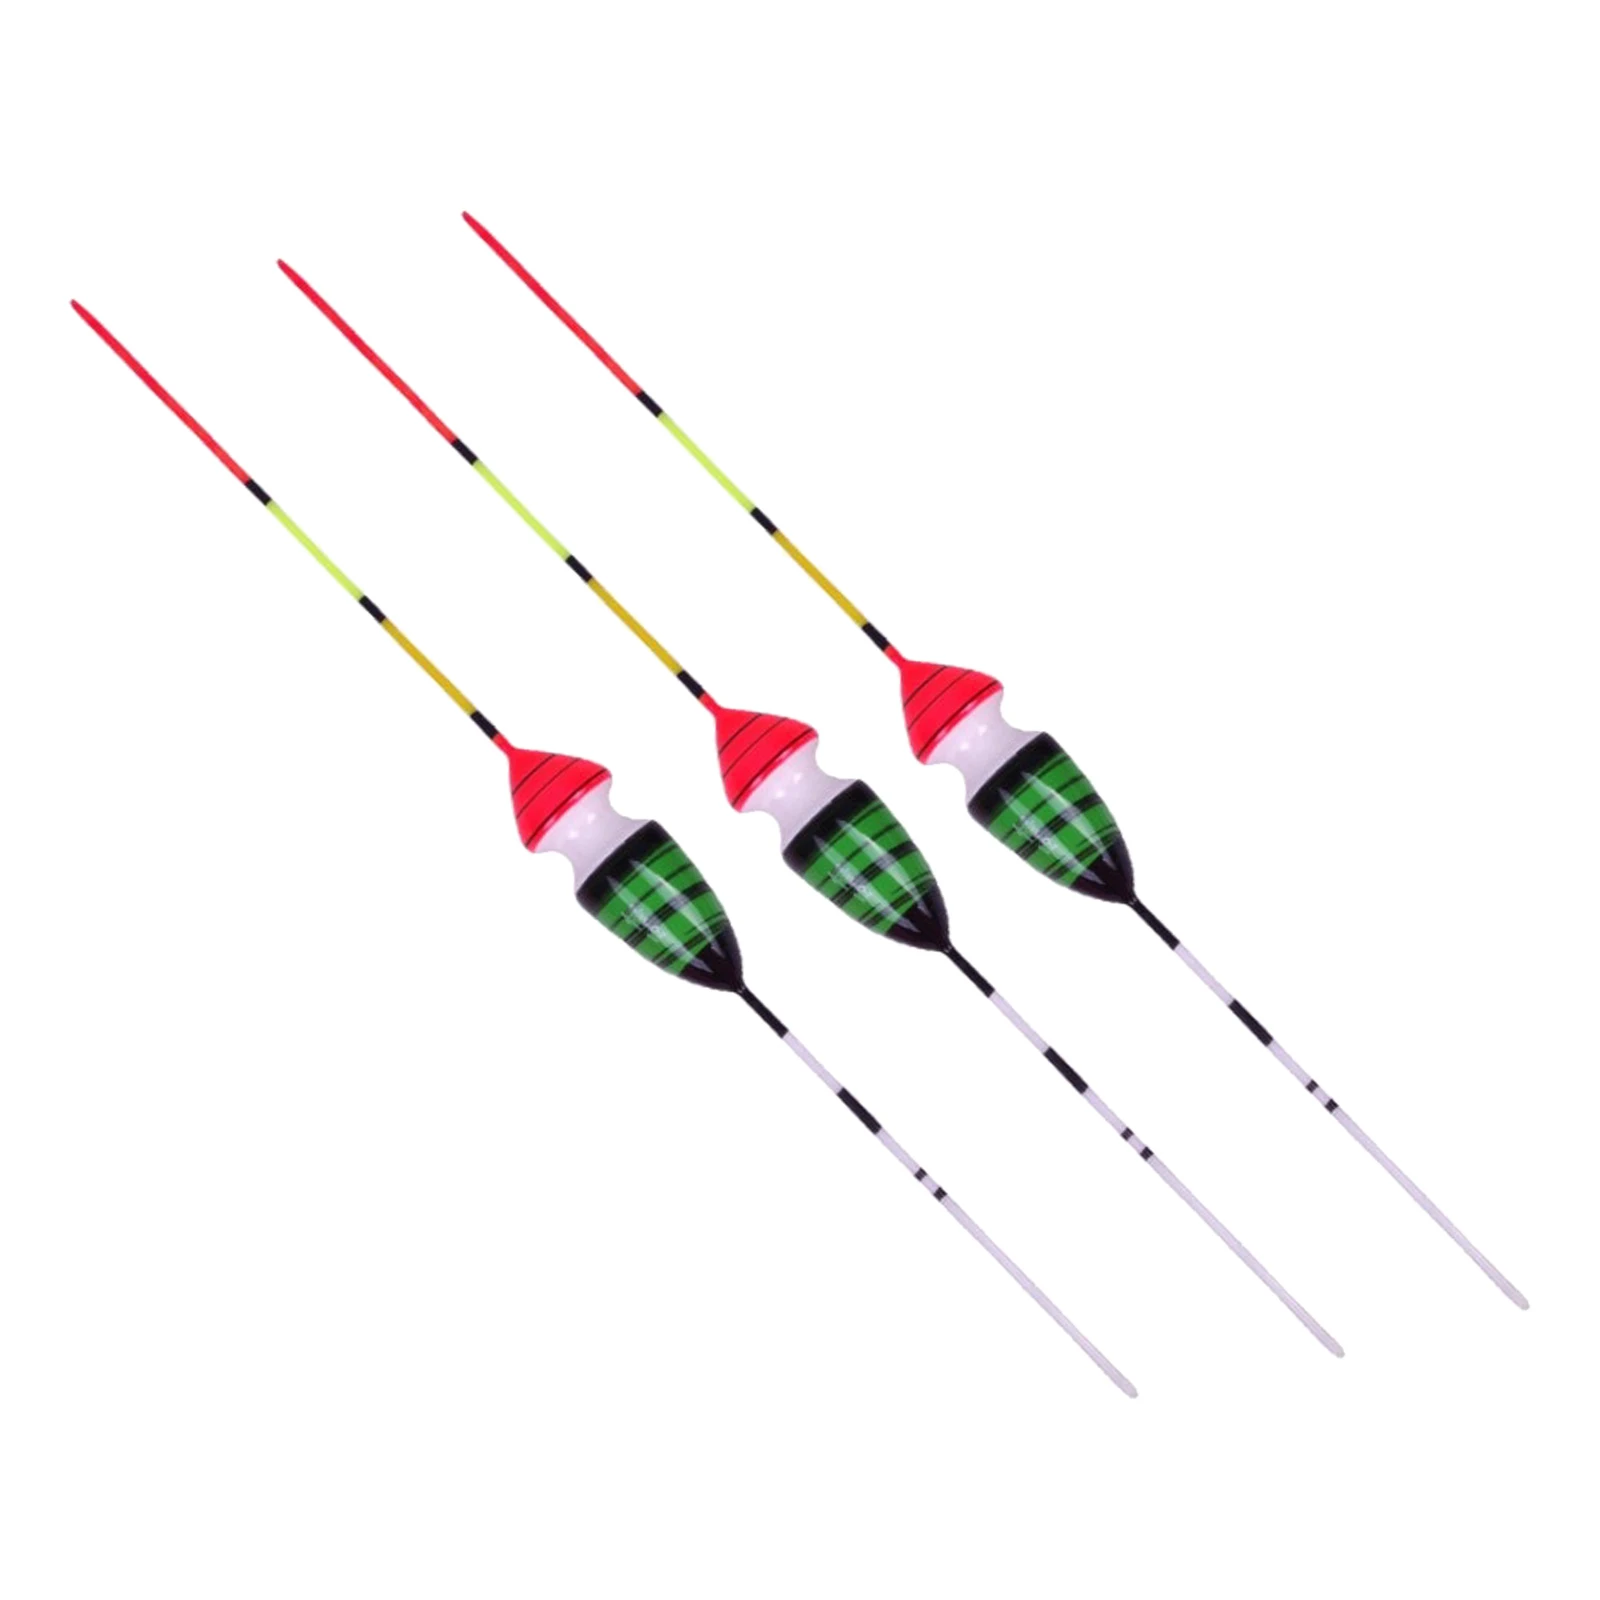 3Pcs Fishing Floats and Bobbers Balsa Wood Float Angling Equipment for Bass Trout Perch Crappie Fishing Tackle Accessories 